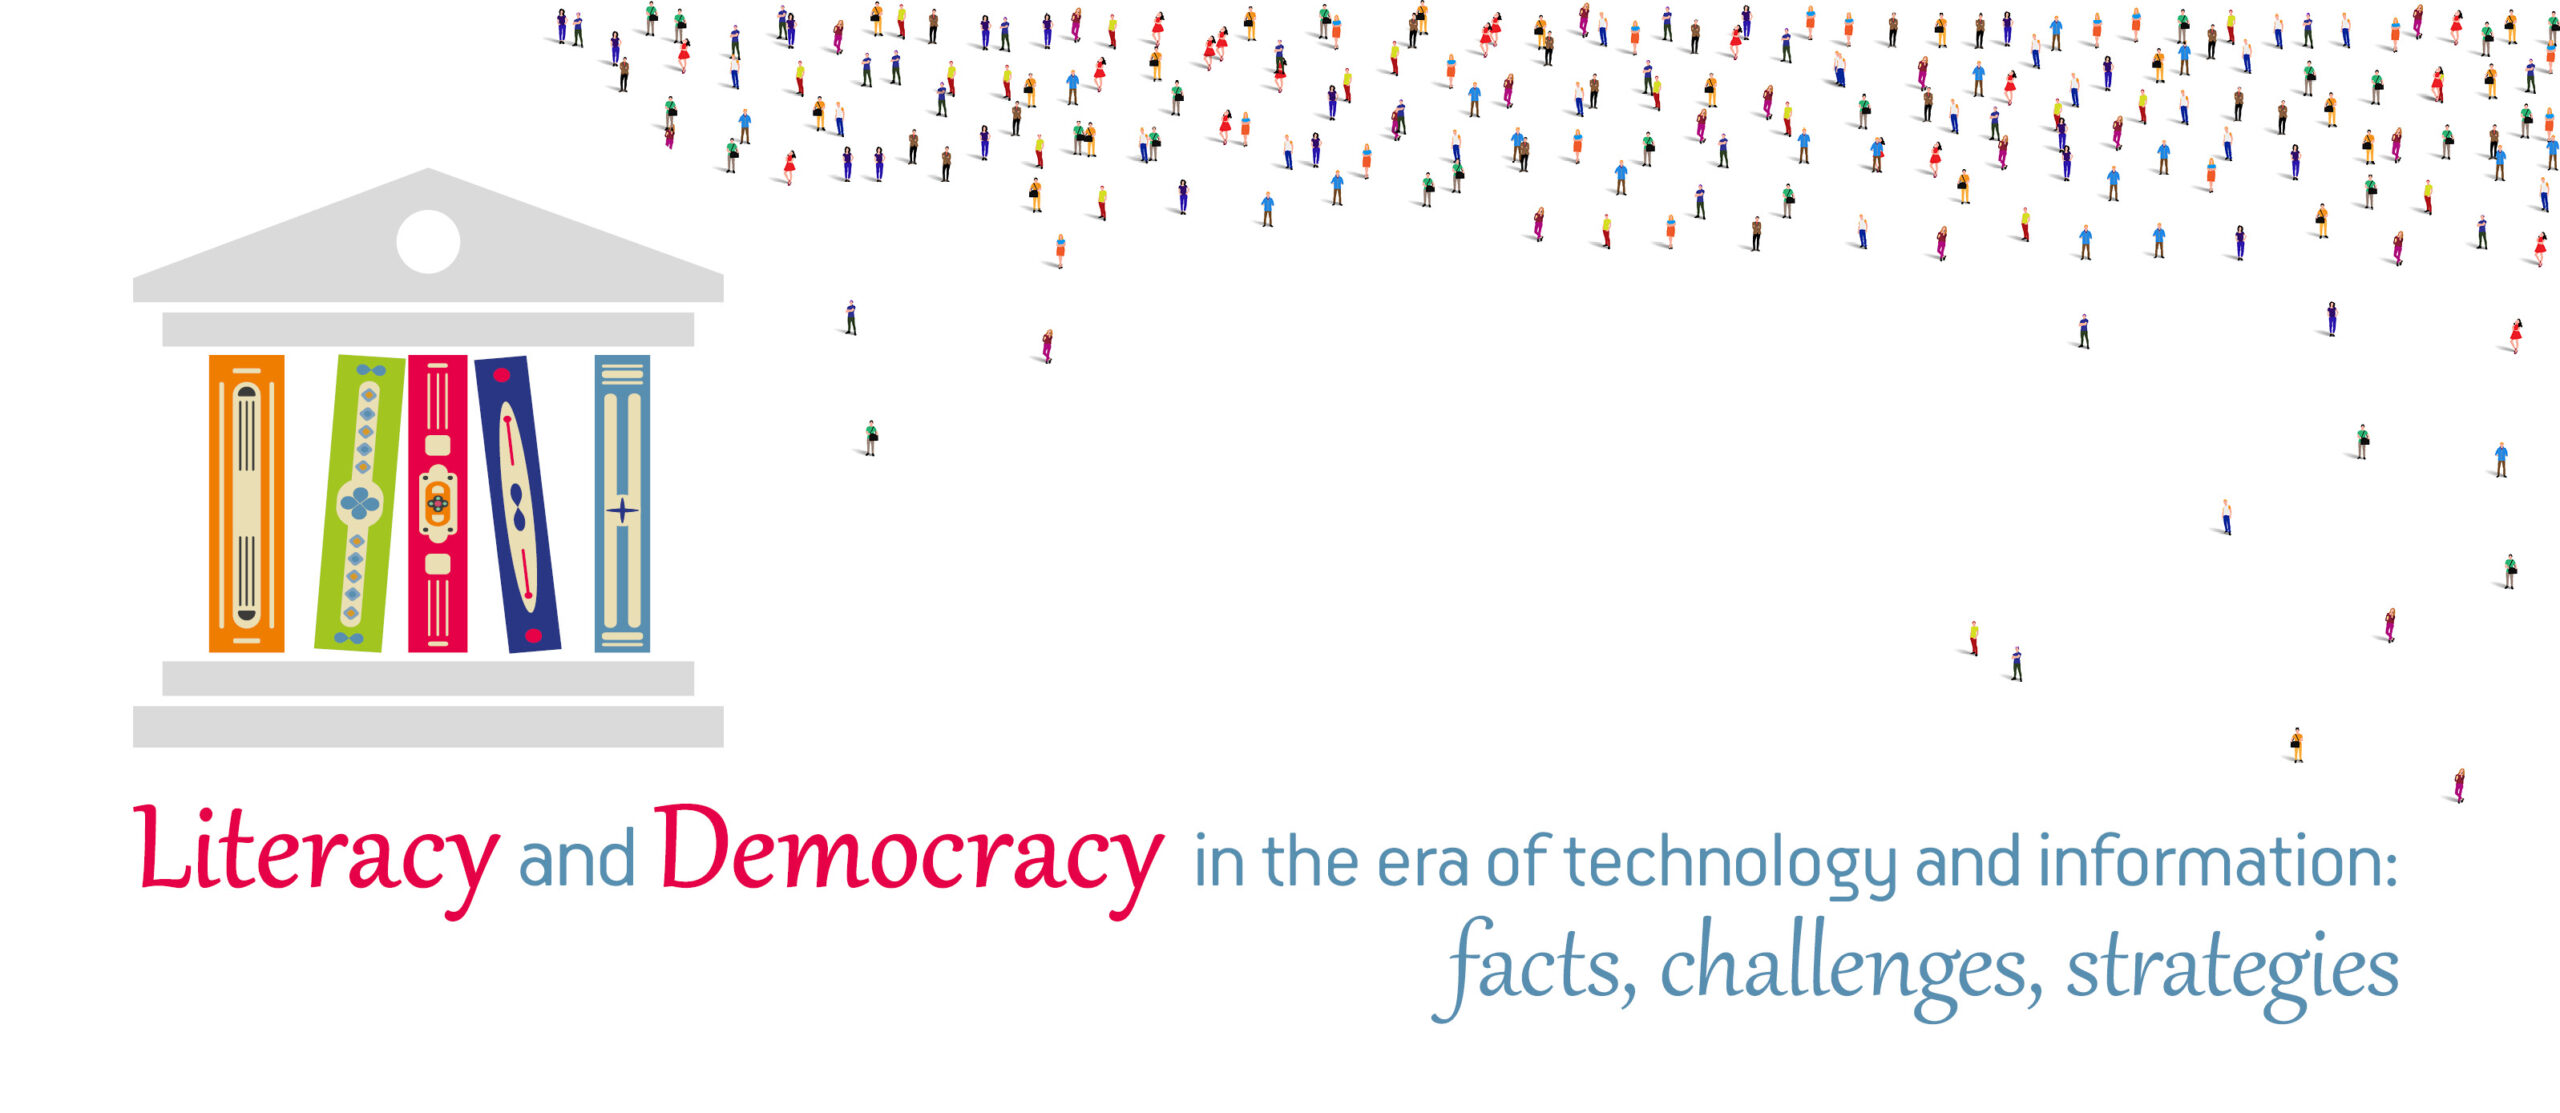 Open Forum “Literacy and Democracy in the Era of Technology and Information: facts, challenges, strategies”